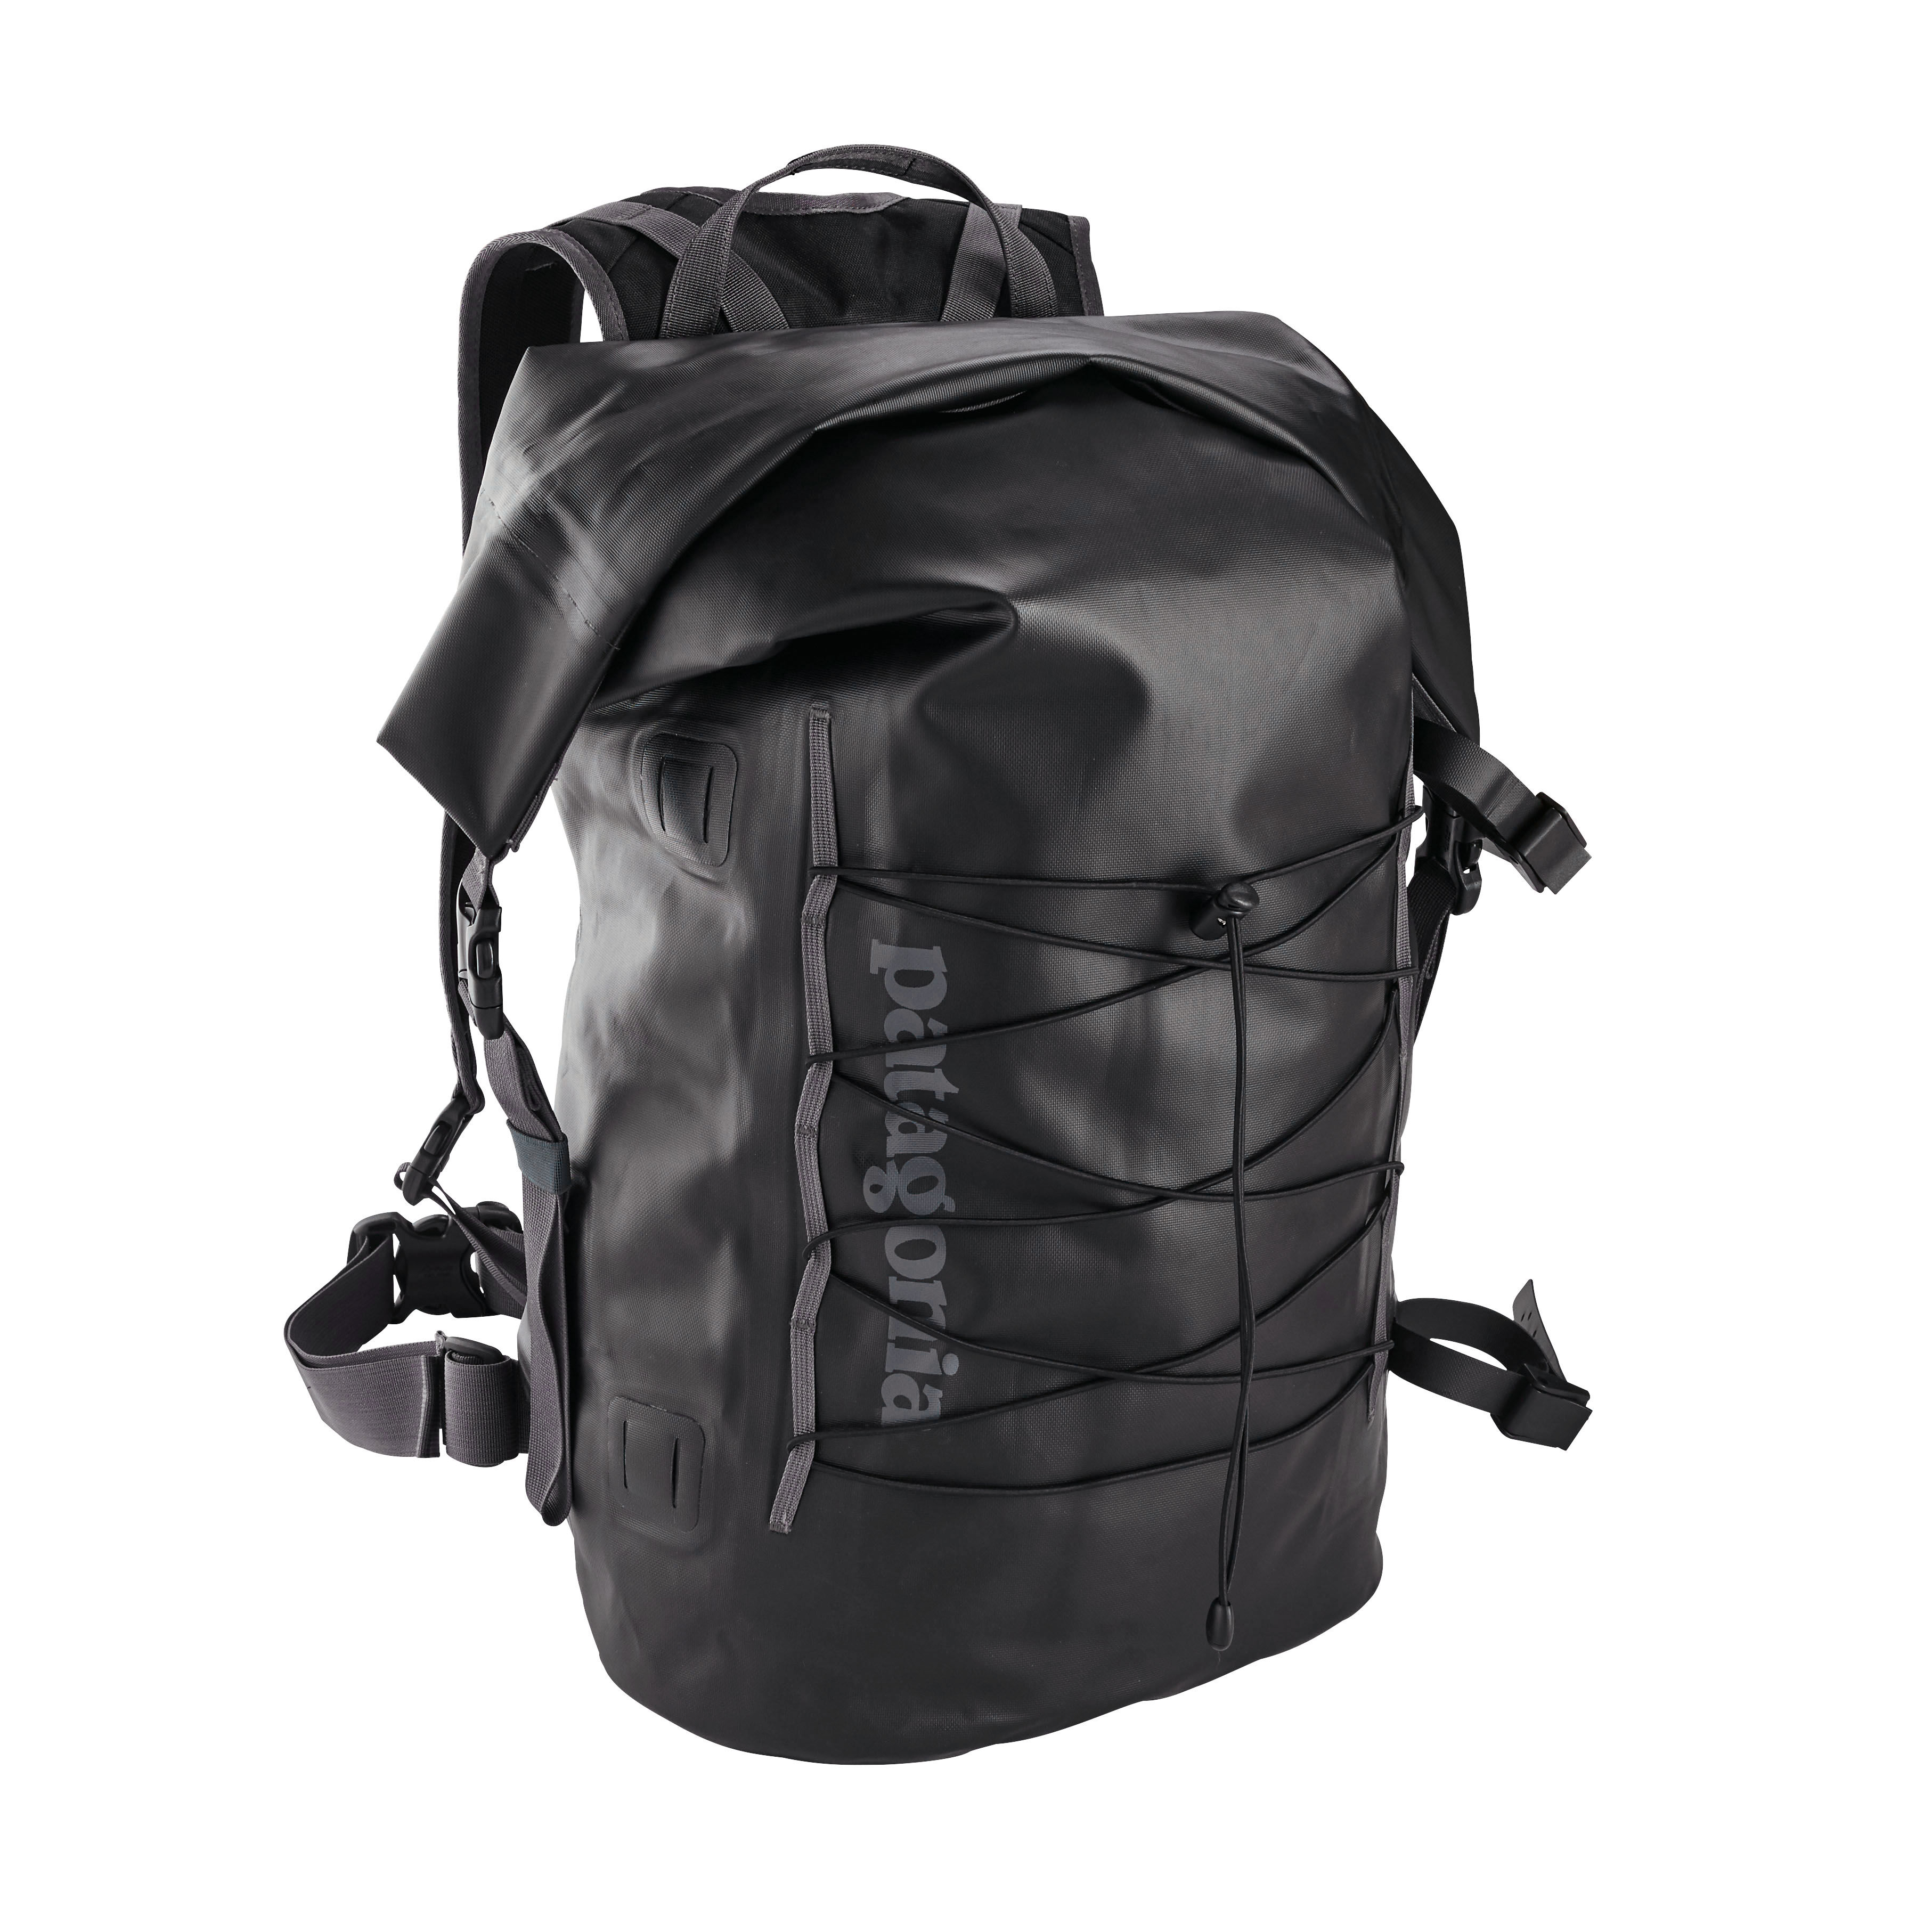 Patagonia - Stormfront Roll Top Pack 45 L - Backpack